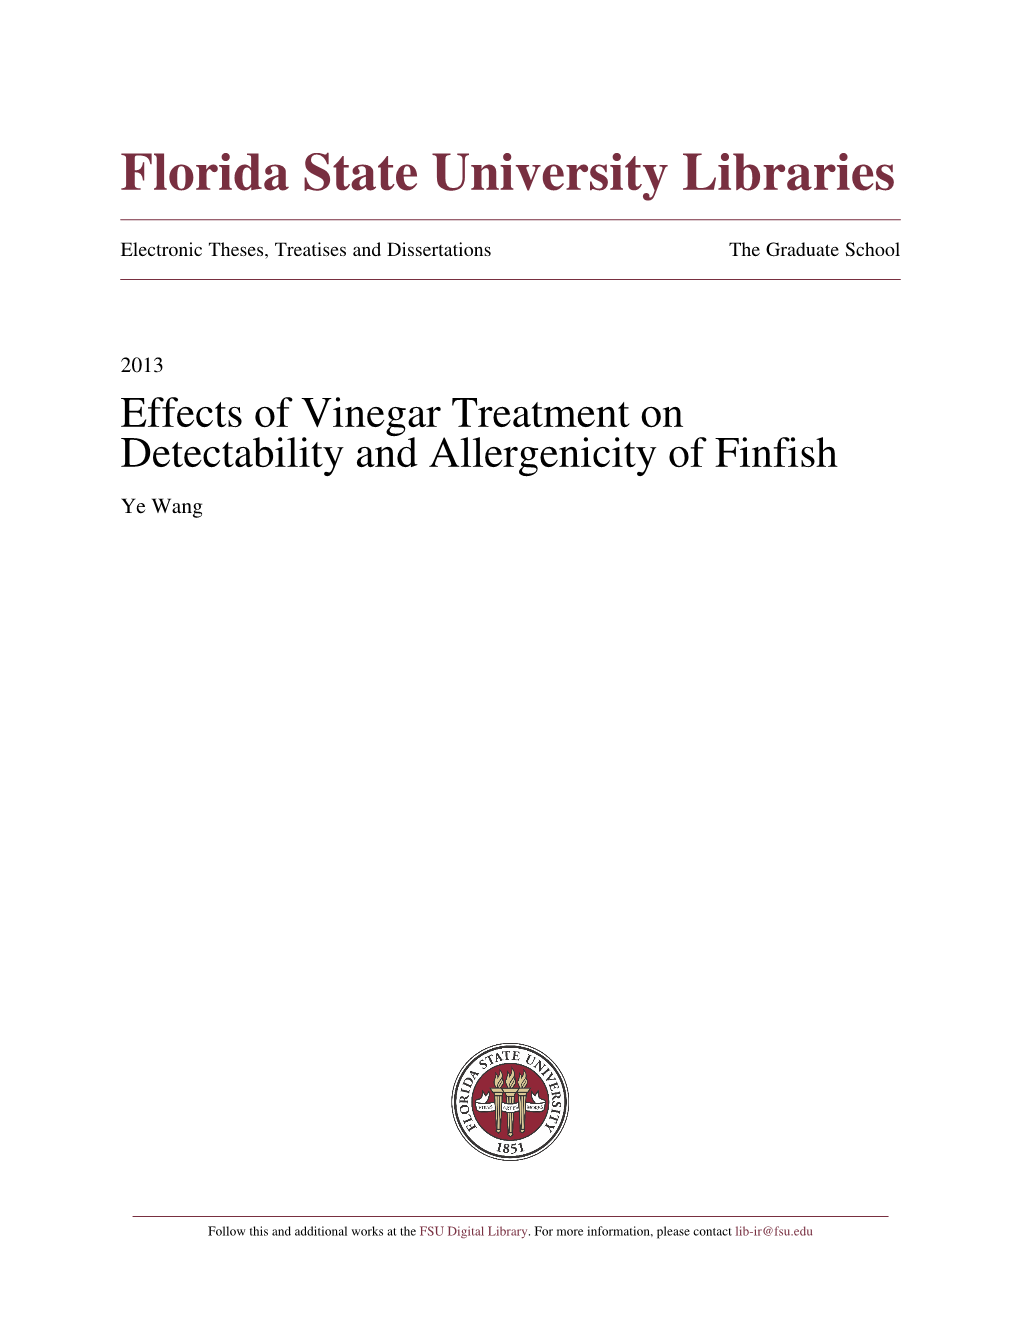 Effects of Vinegar Treatment on Detectivity and Allergenicity of Finfish